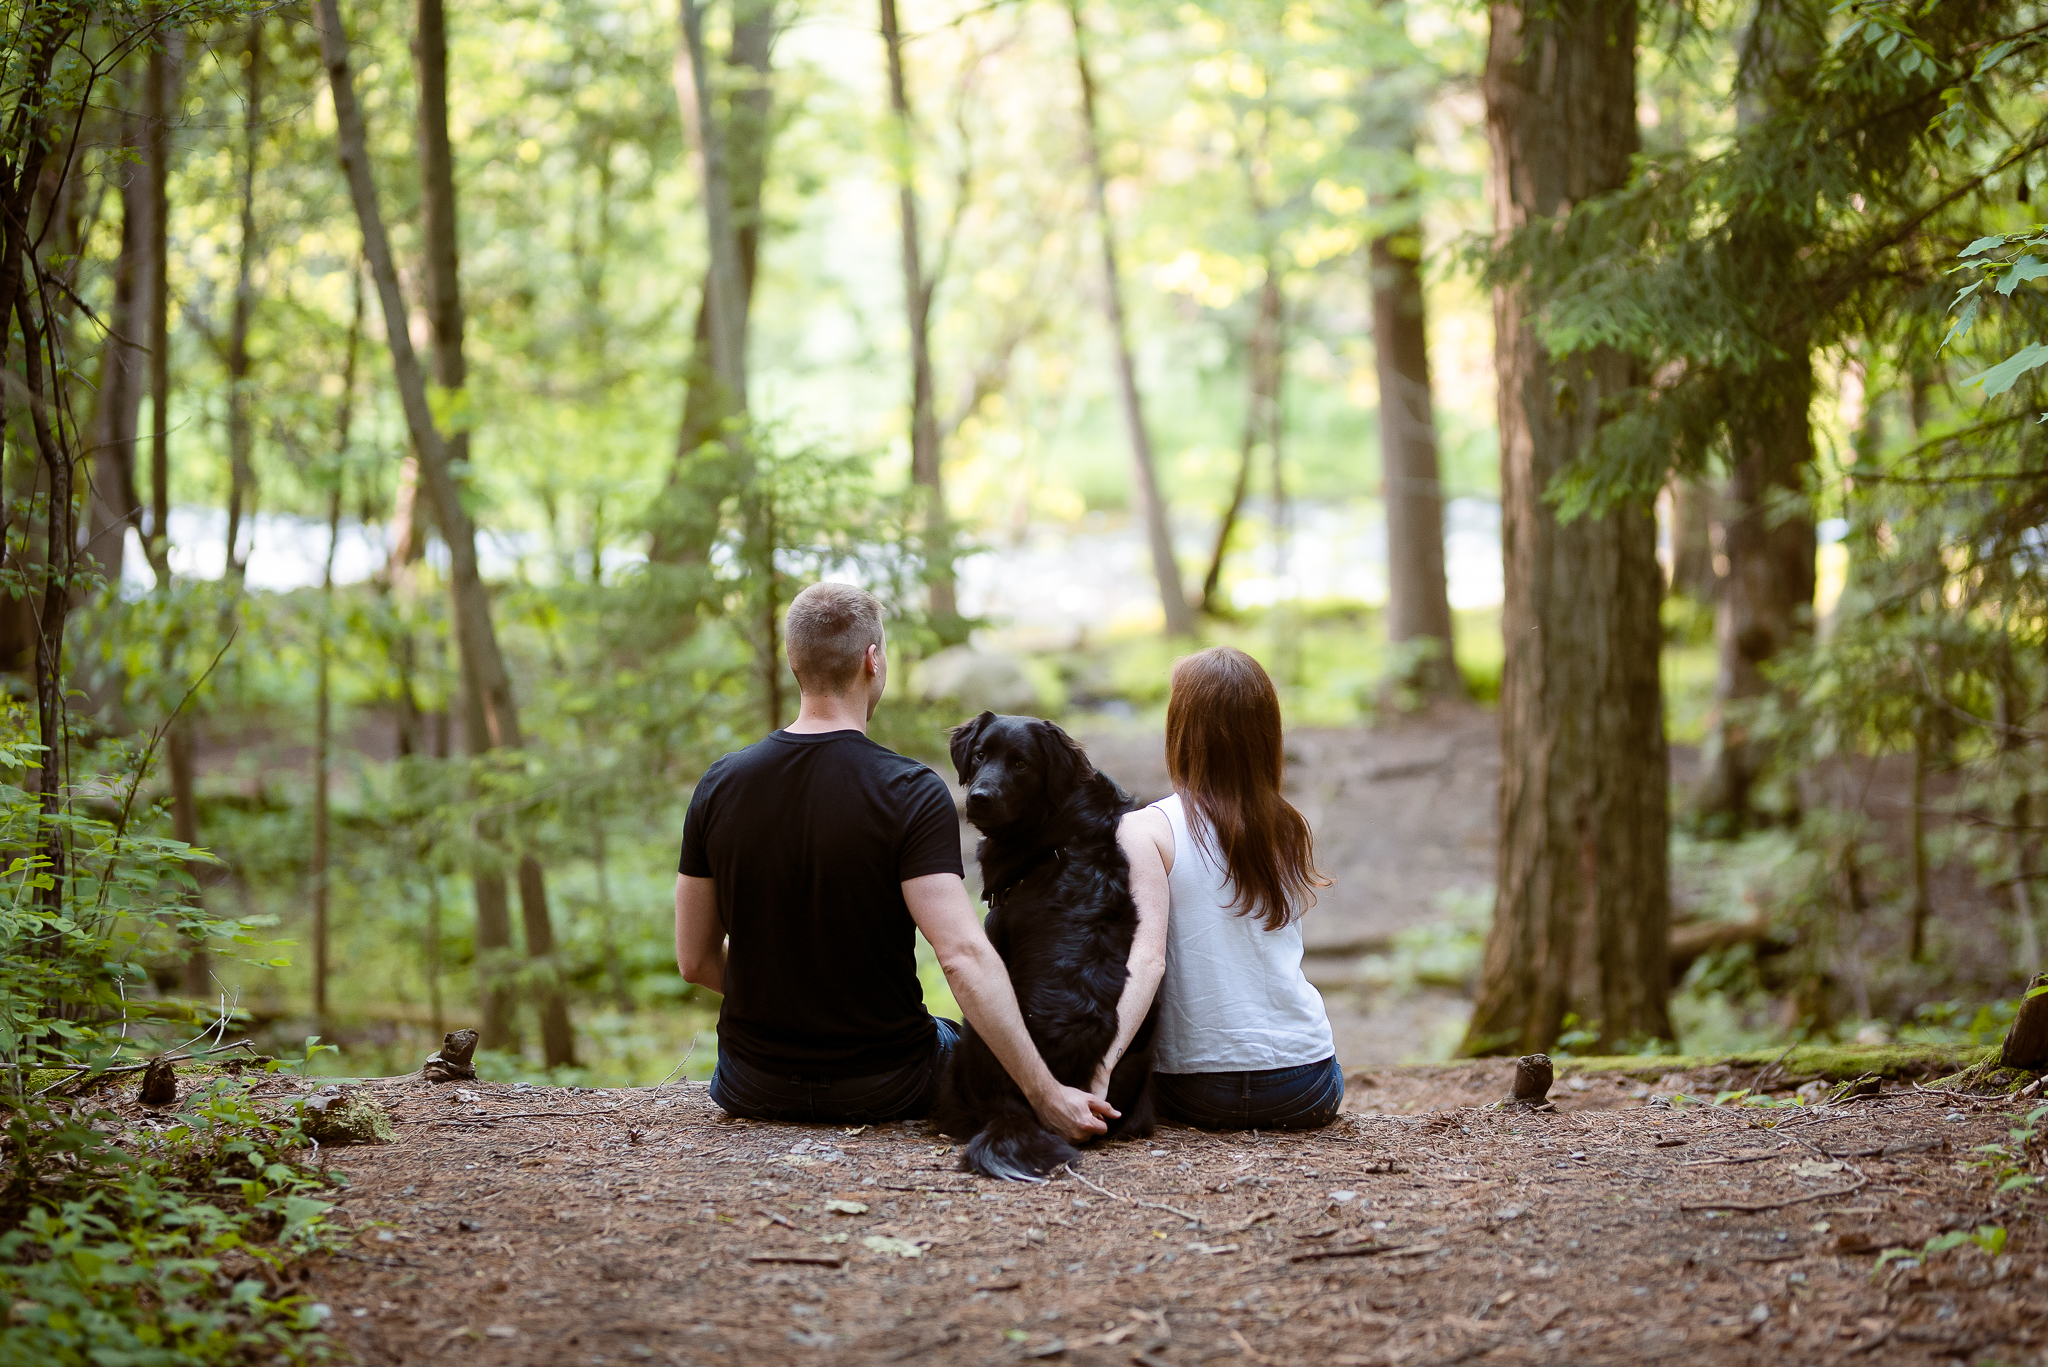 Couples356NaomiLuciennePhotography062019-Edit.jpg